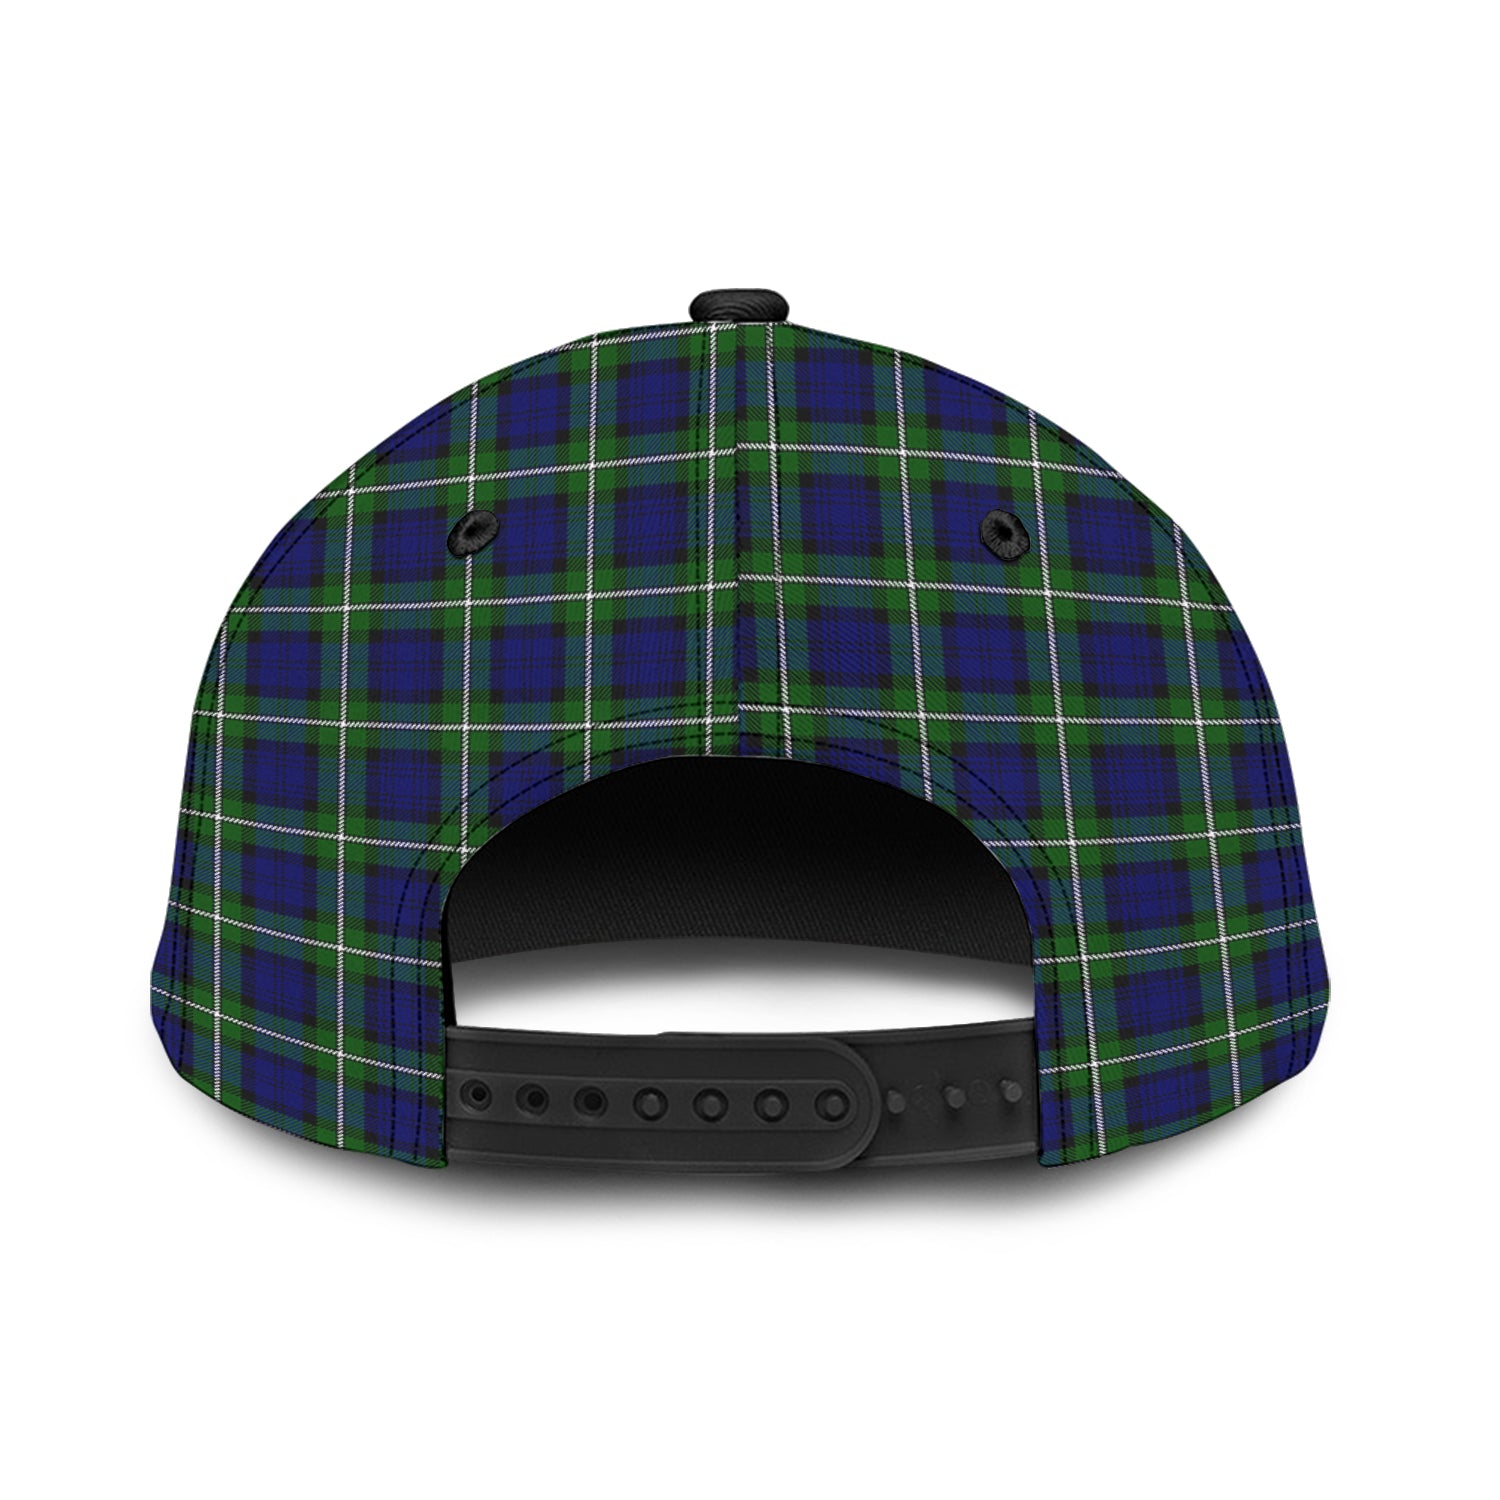 forbes-modern-tartan-classic-cap-with-family-crest